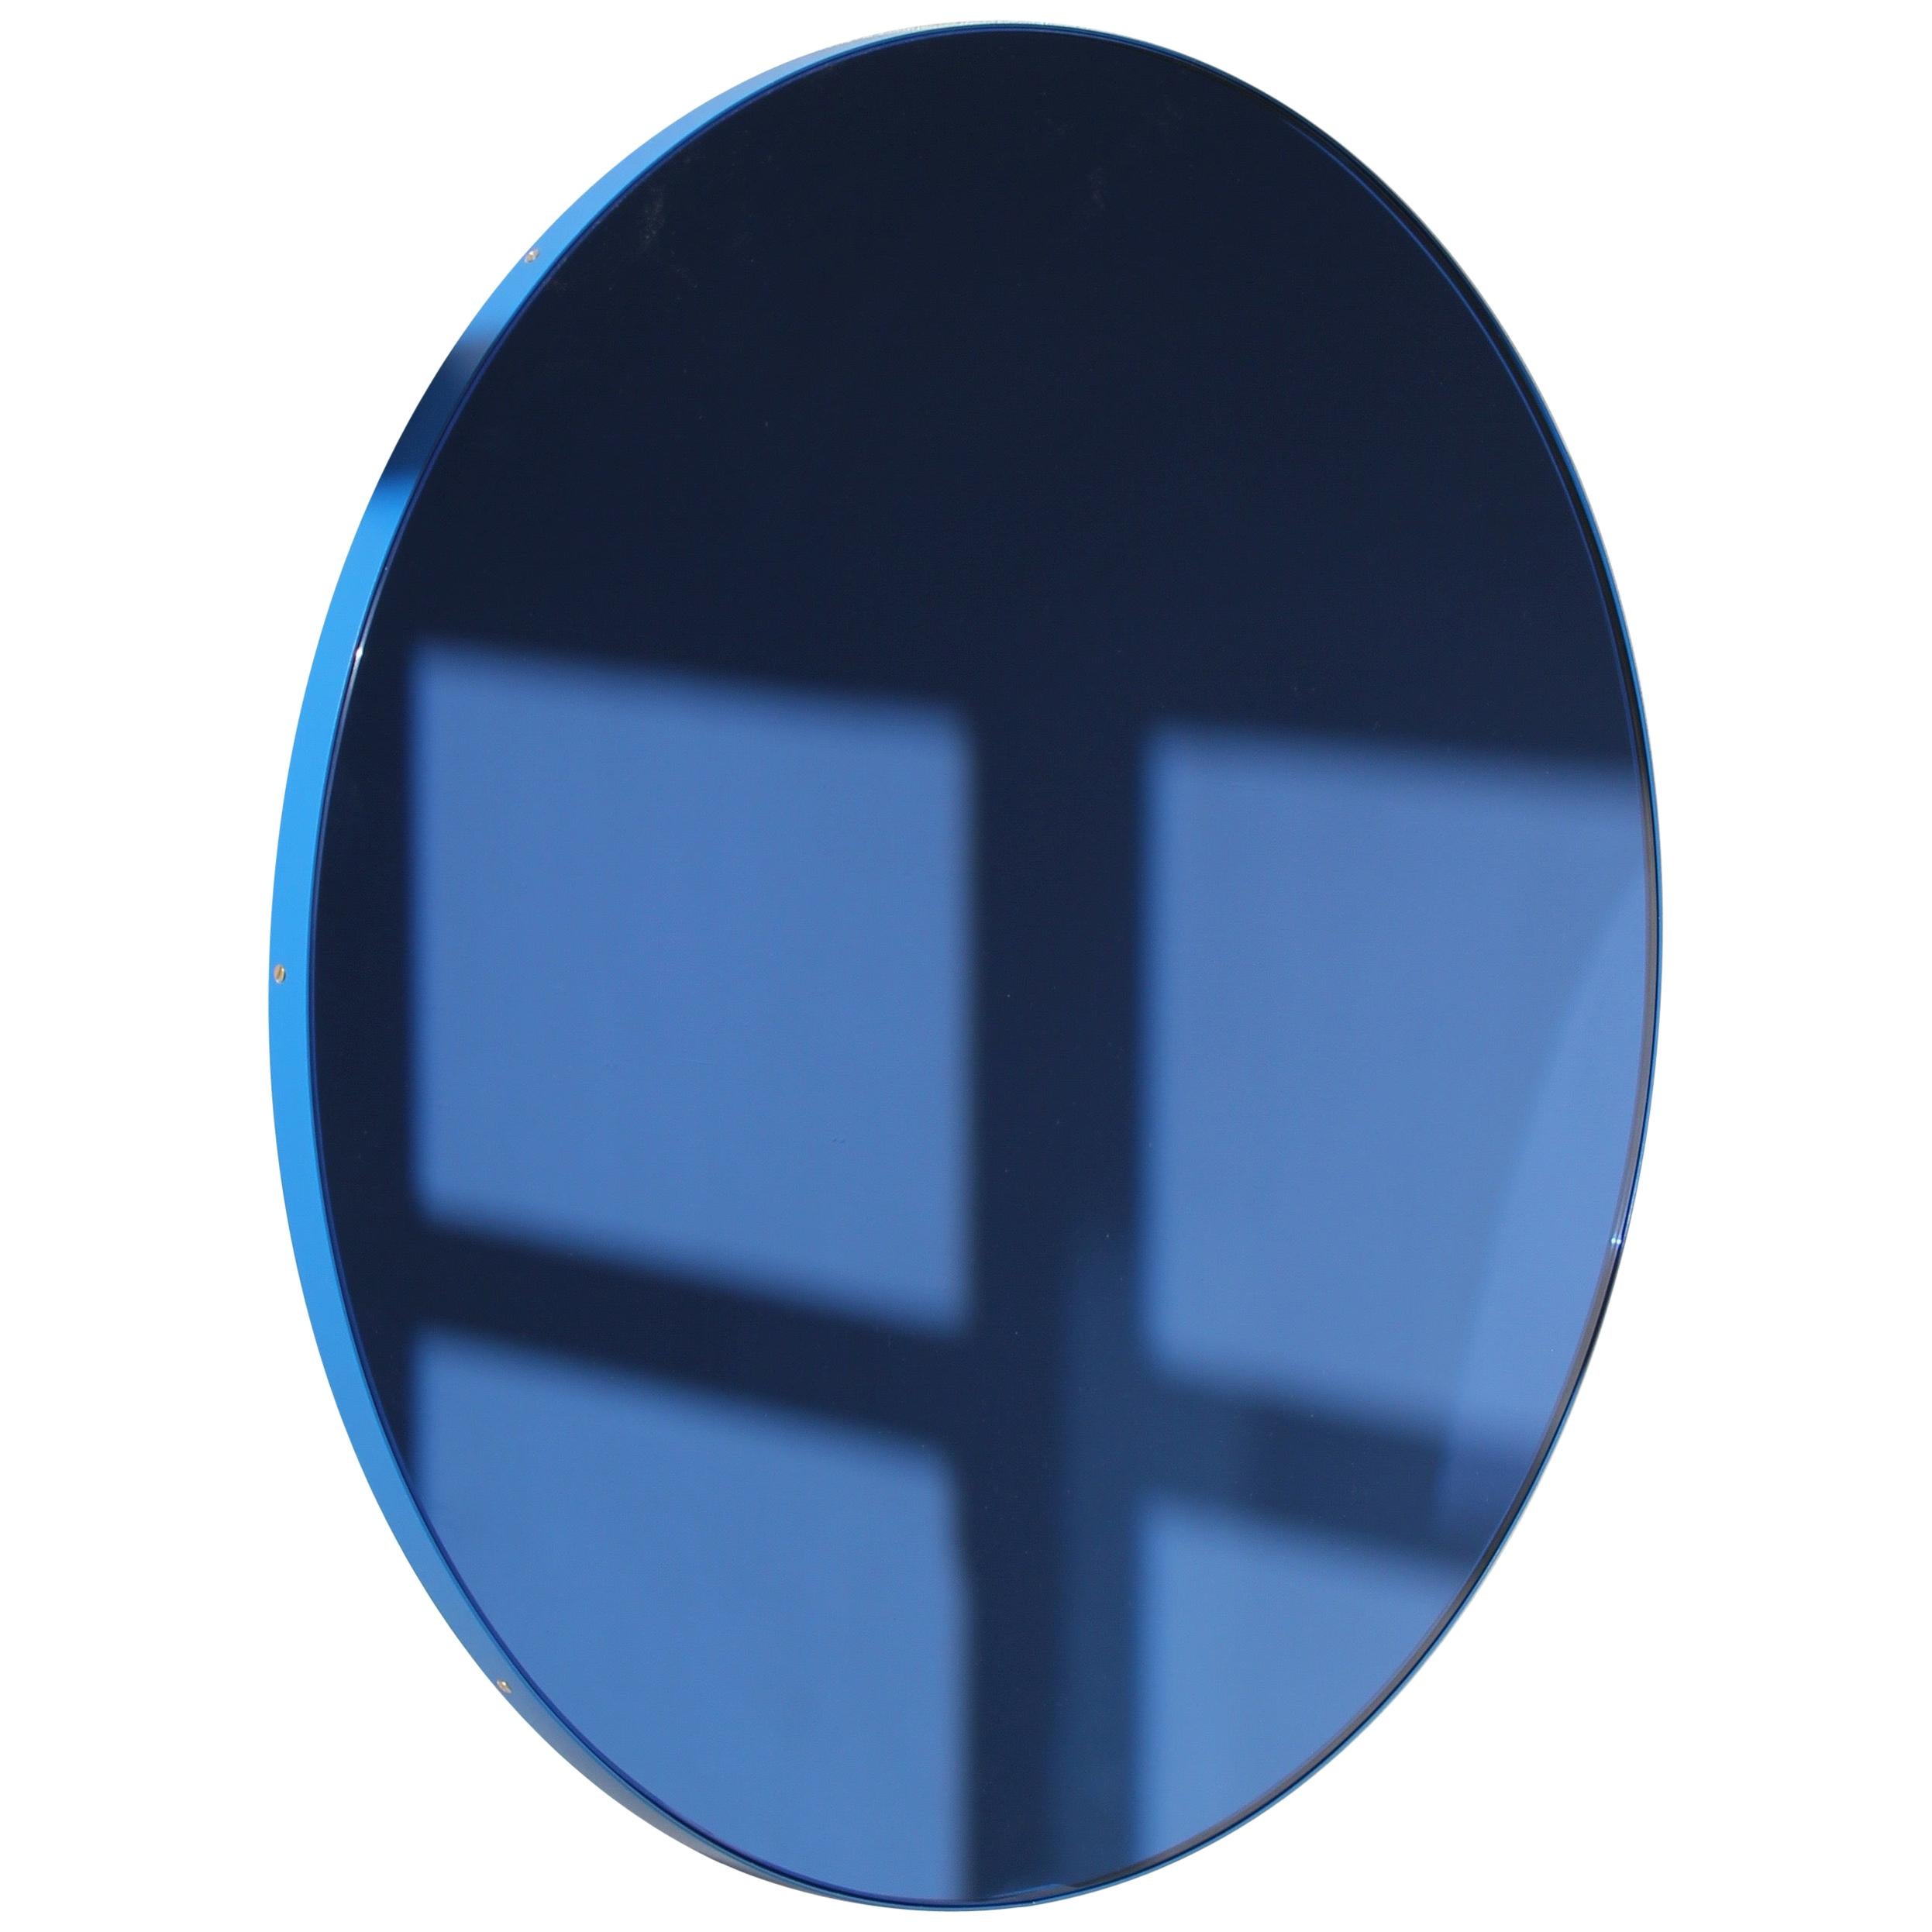 Orbis Blue Tinted Decorative Round Mirror with a Blue Frame, Large For Sale